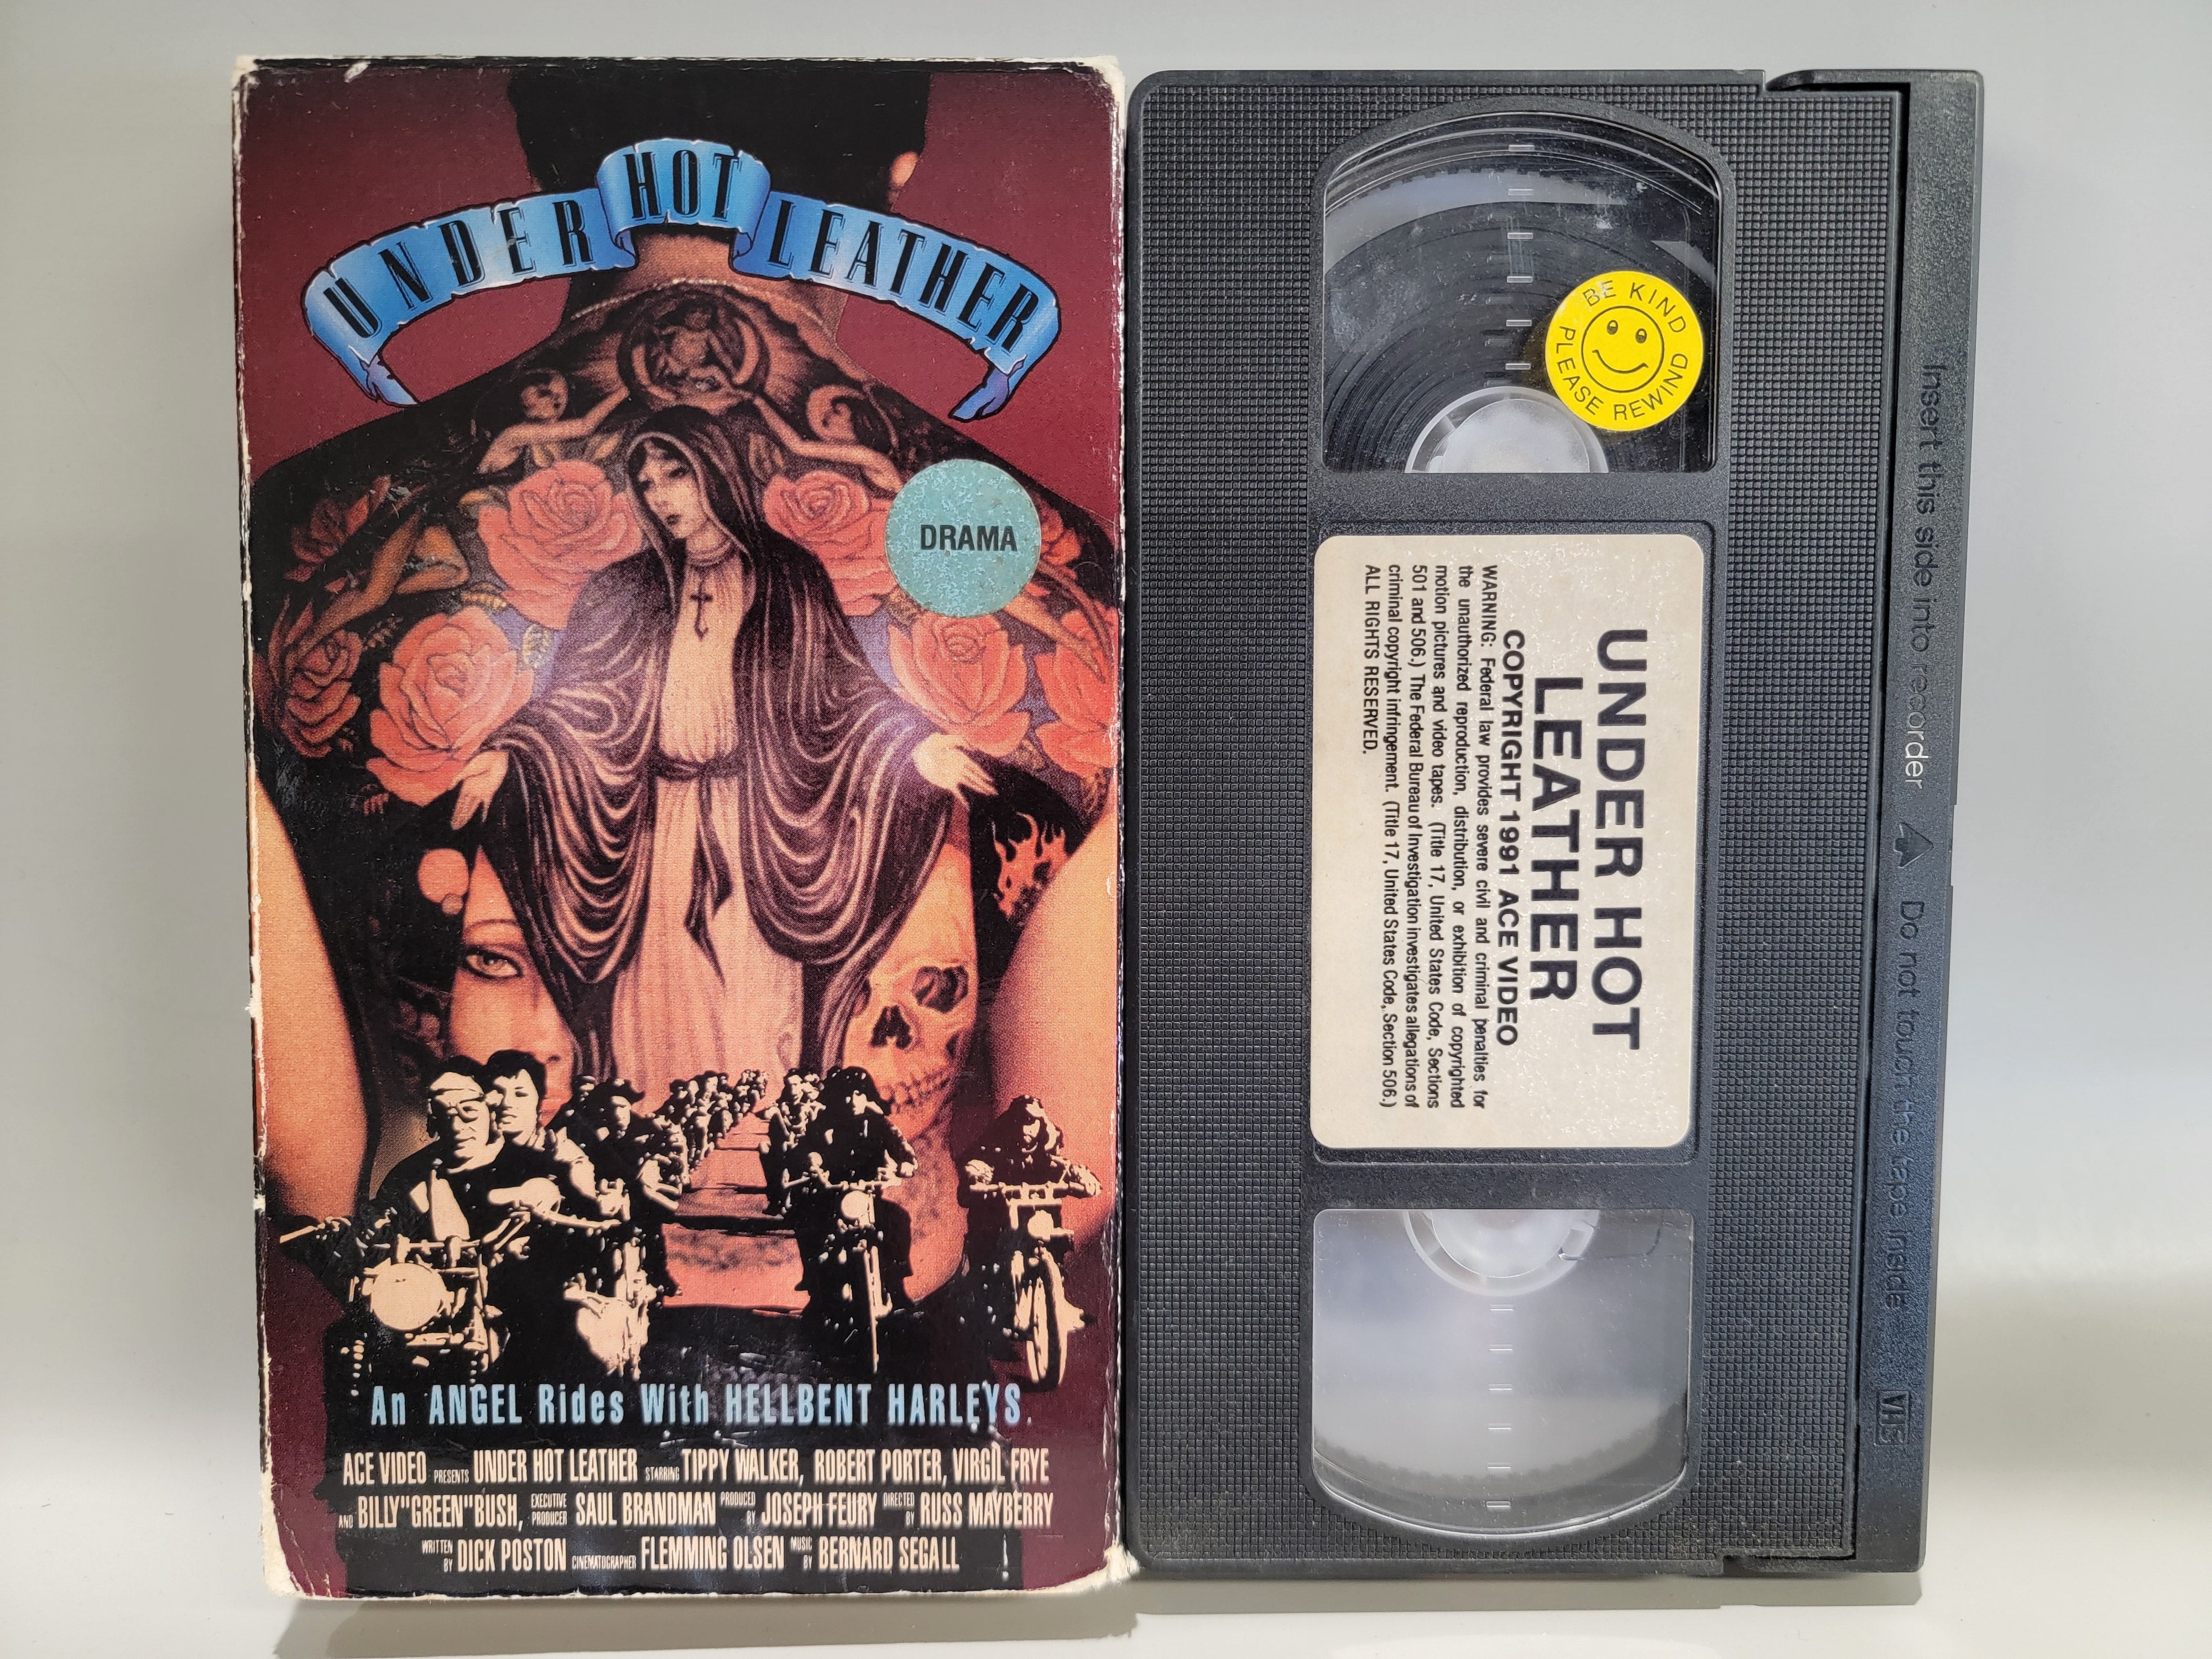 UNDER HOT LEATHER VHS [USED]